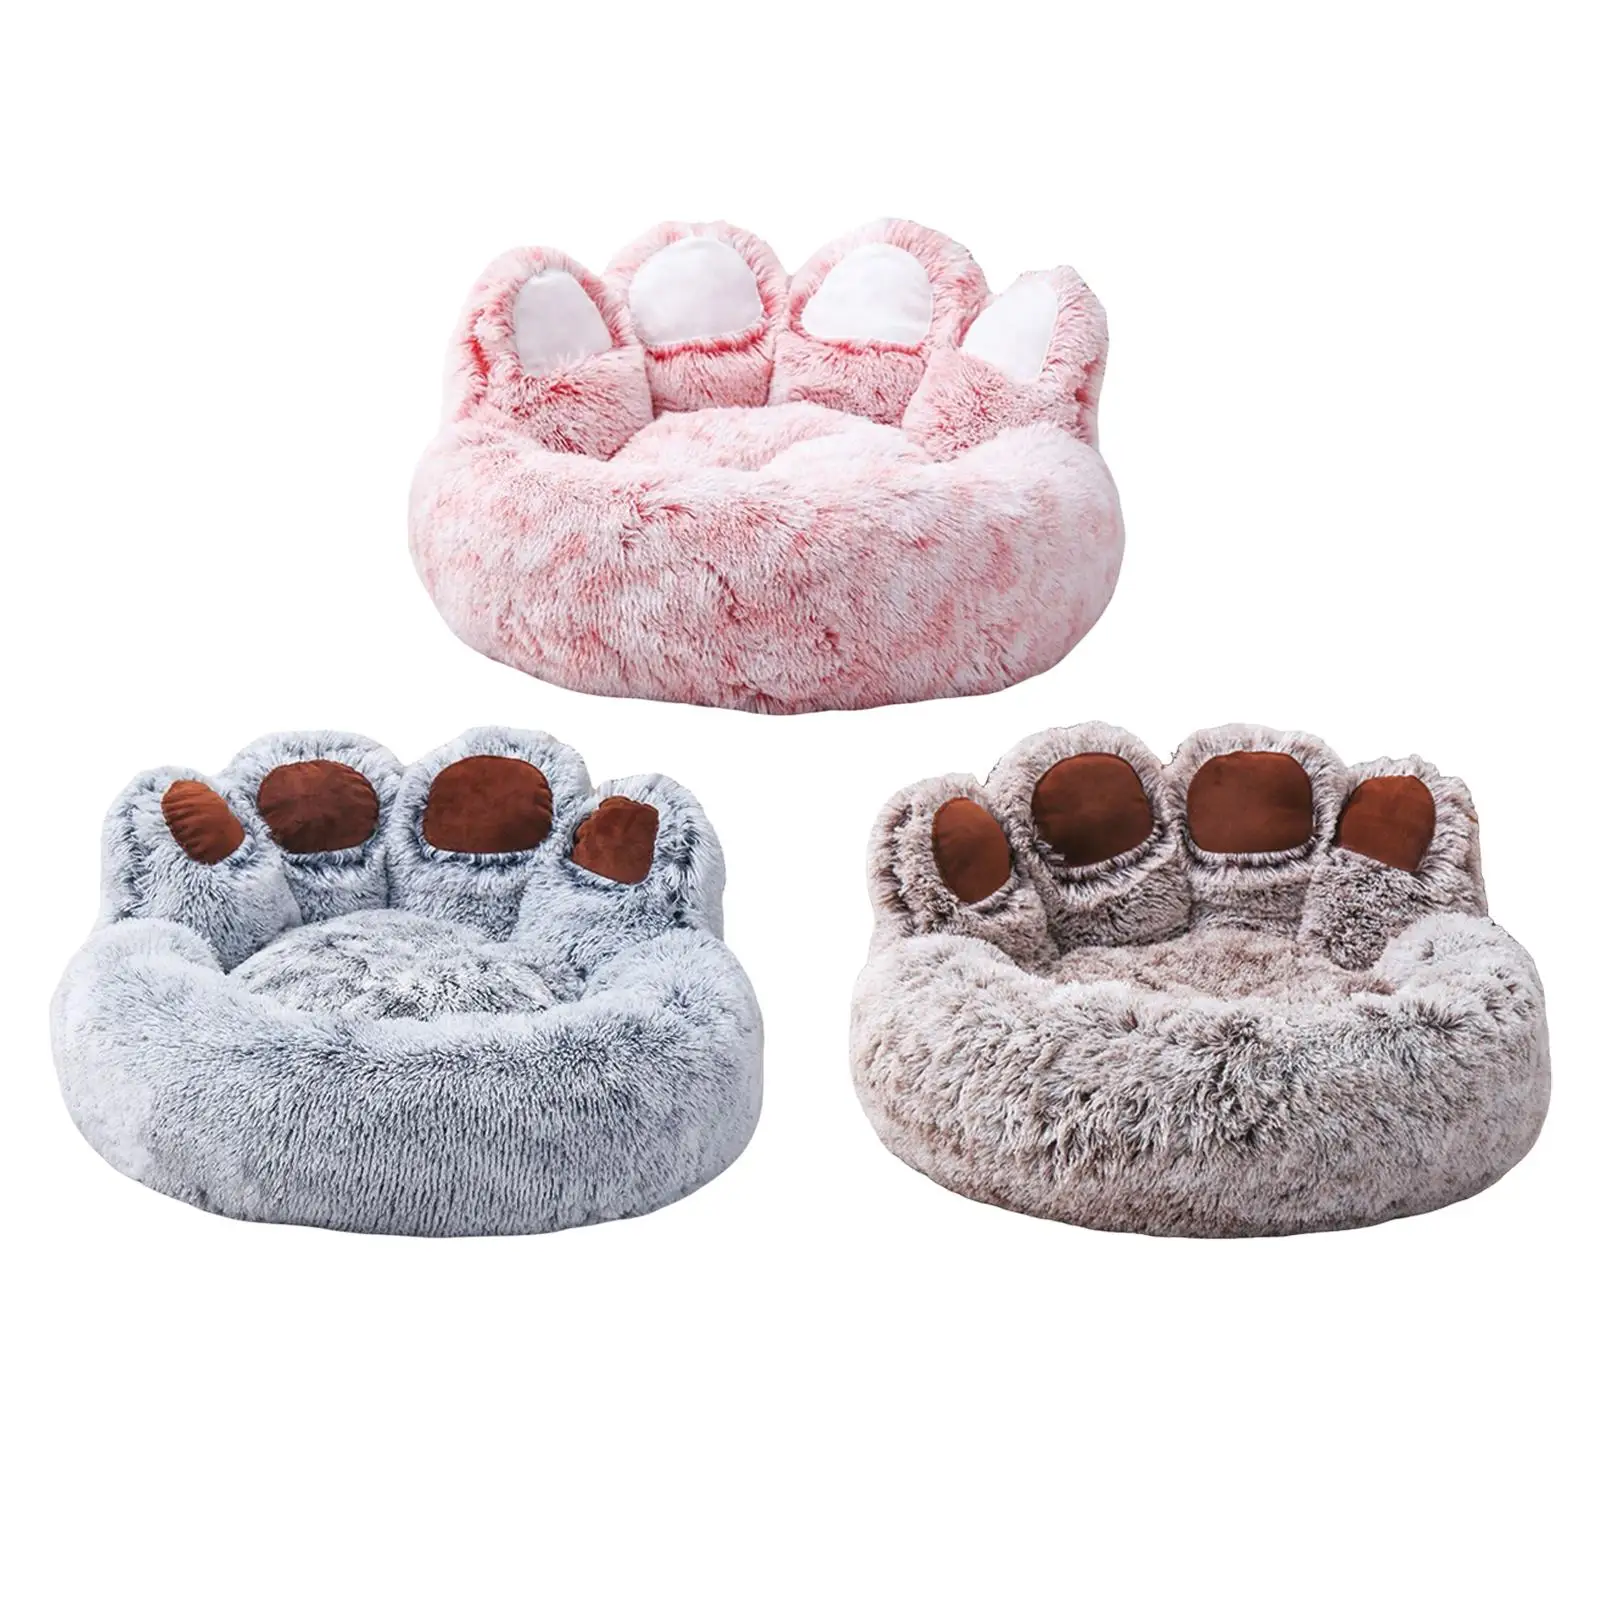 Plush Cat Warm House Dog Bed Hut Comfortable Nonslip Bottom Calming Pet Blanket for Doggy Puppy Indoor Playing Sleeping Cat